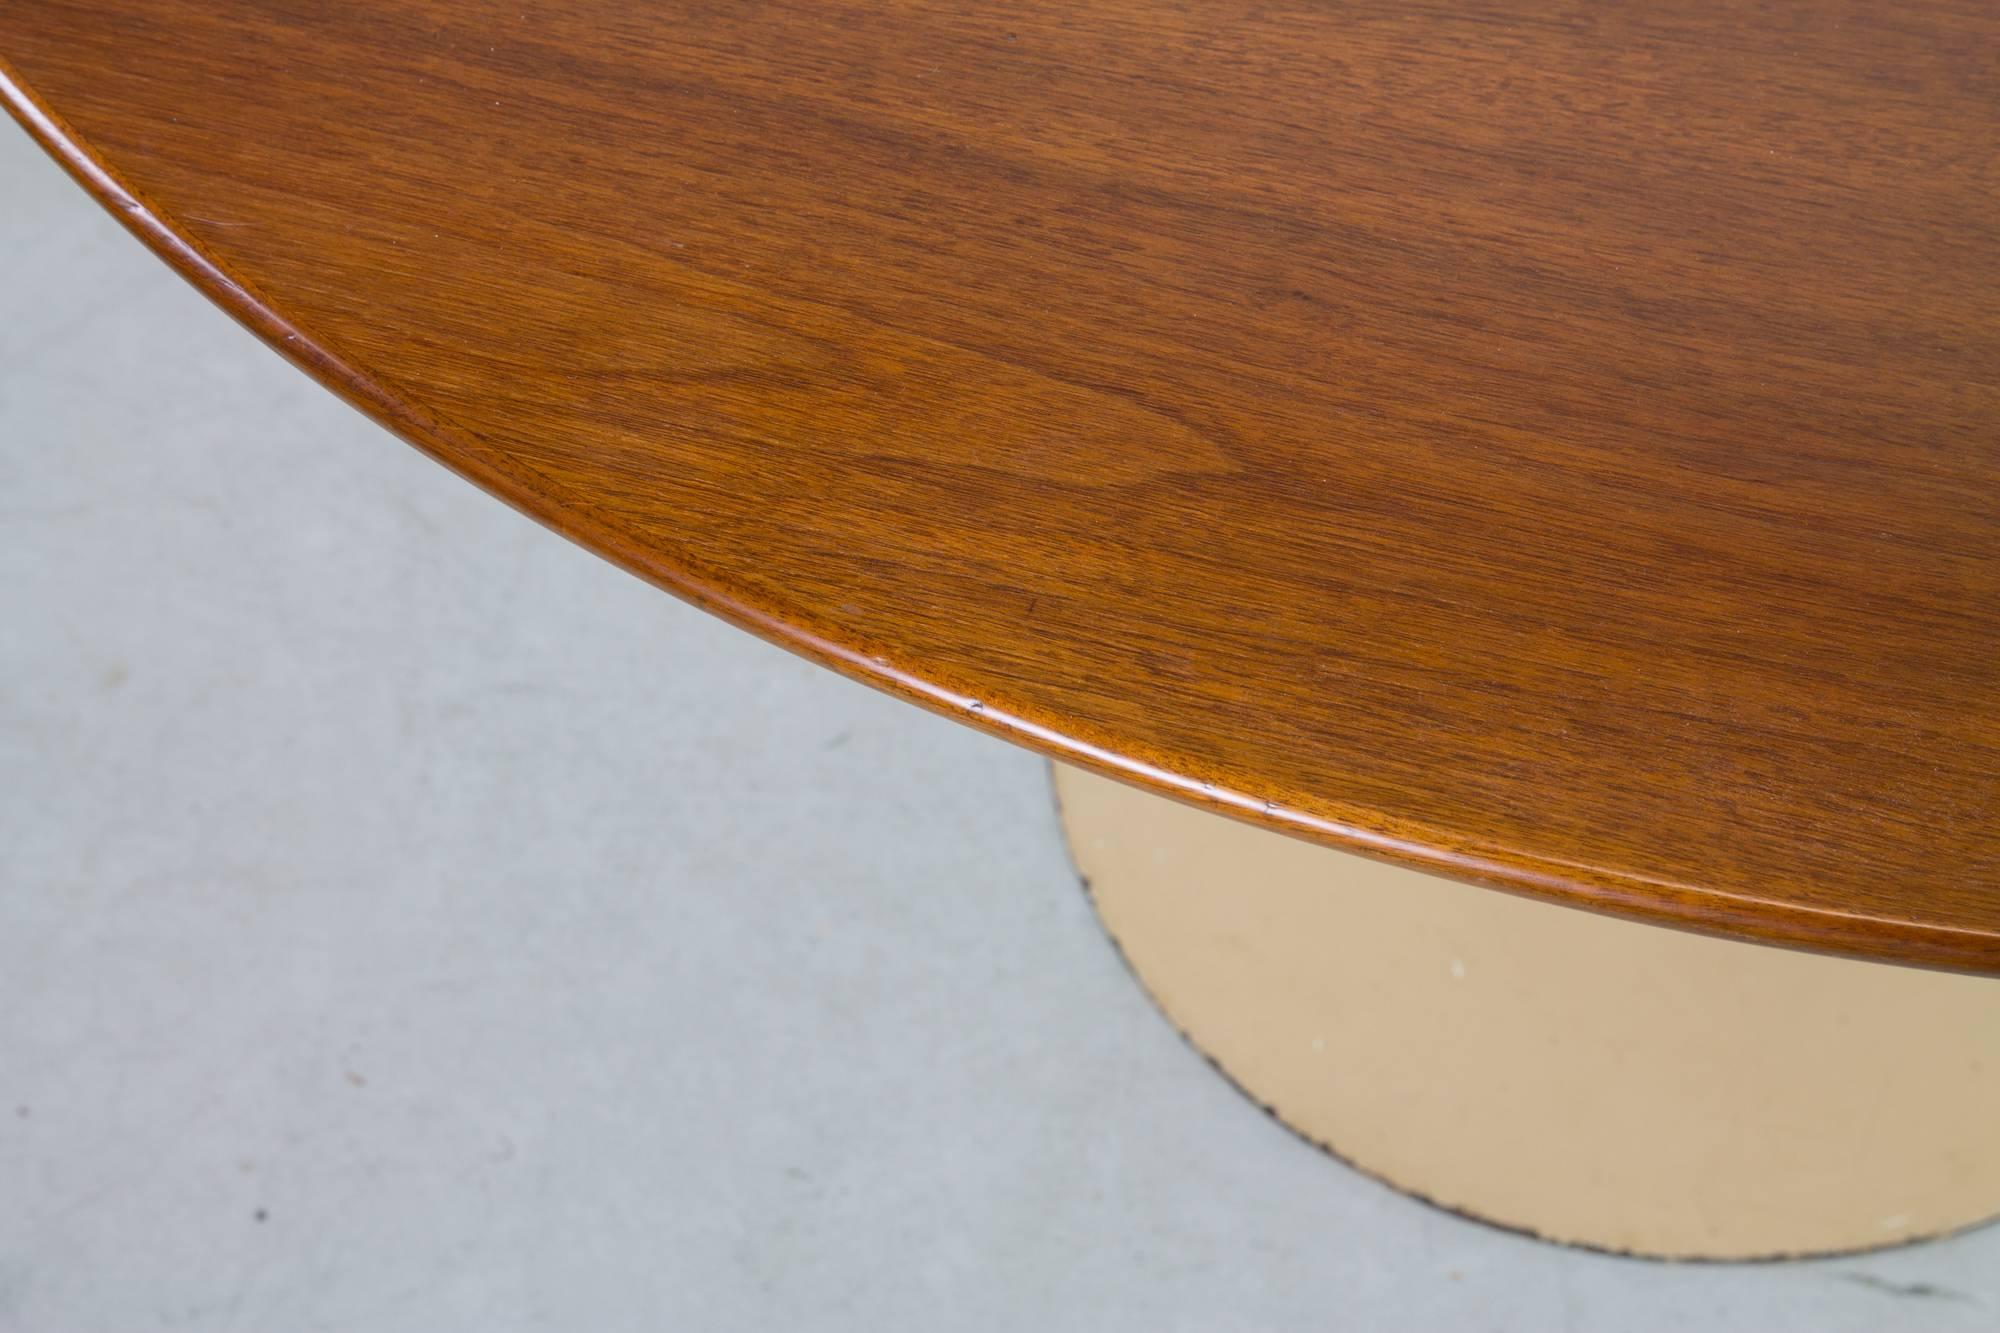 Stunning circular walnut top tulip dining table by Eero Saarinen for Knoll International with a robust, early production base with original paint.